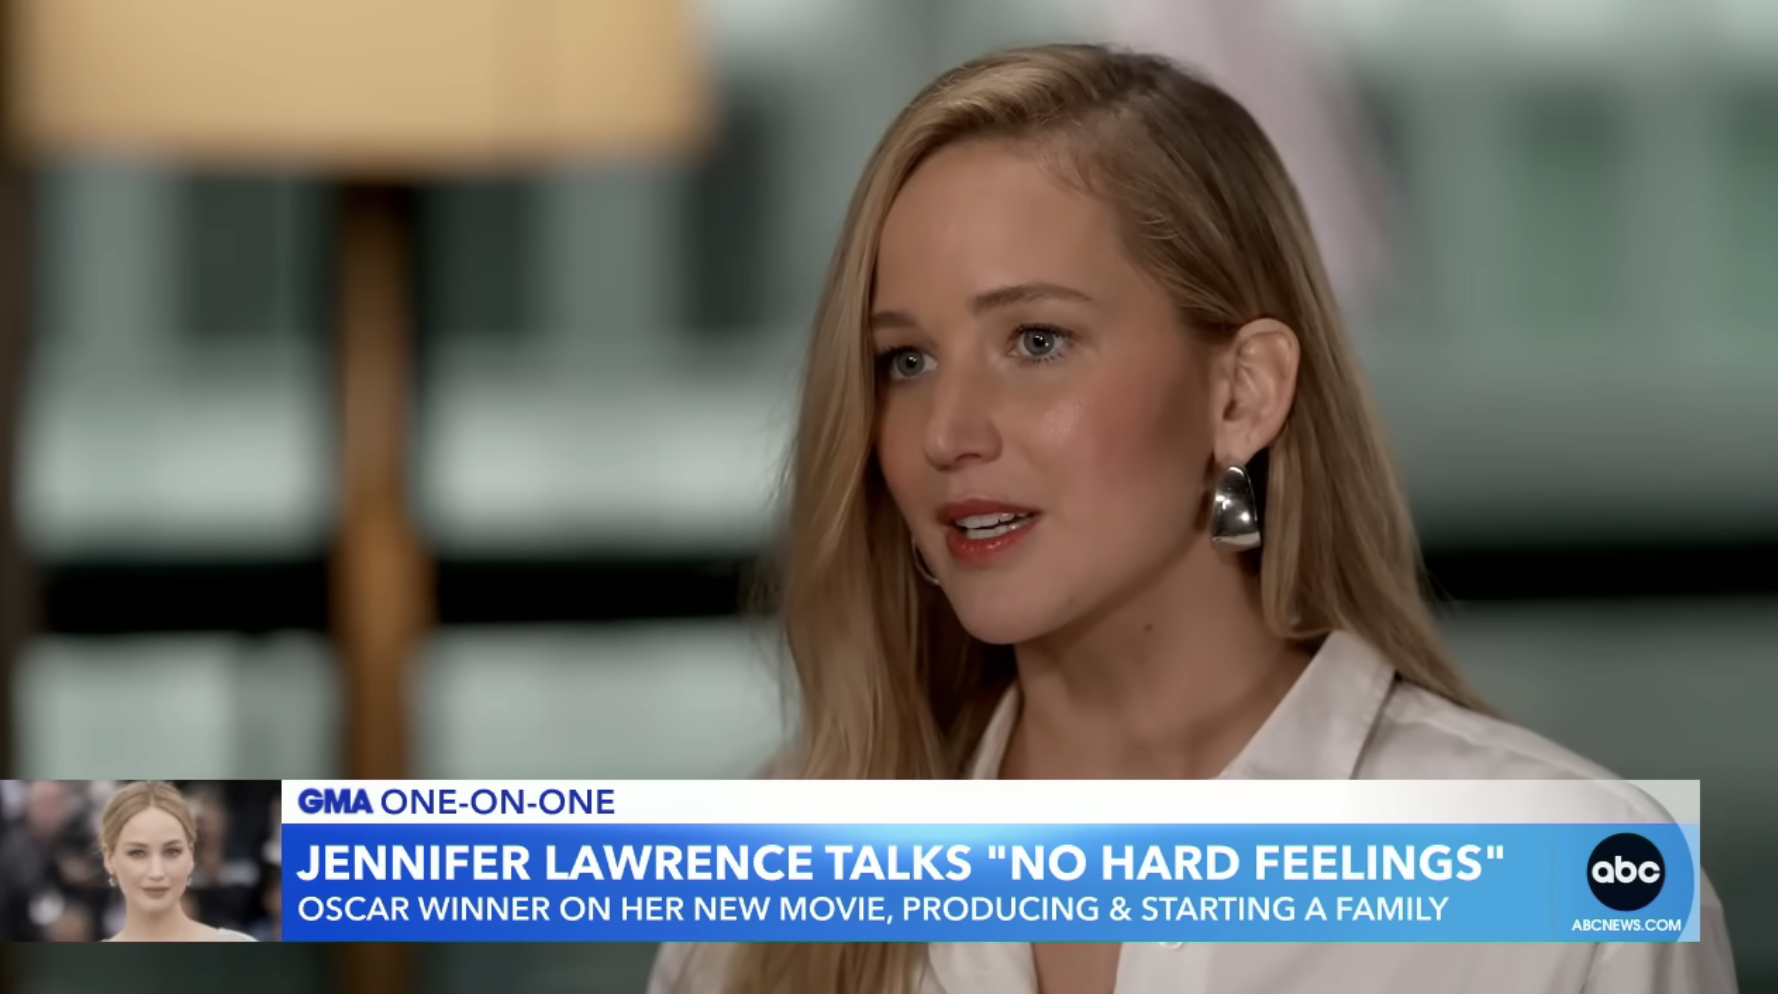 jennifer during the interview